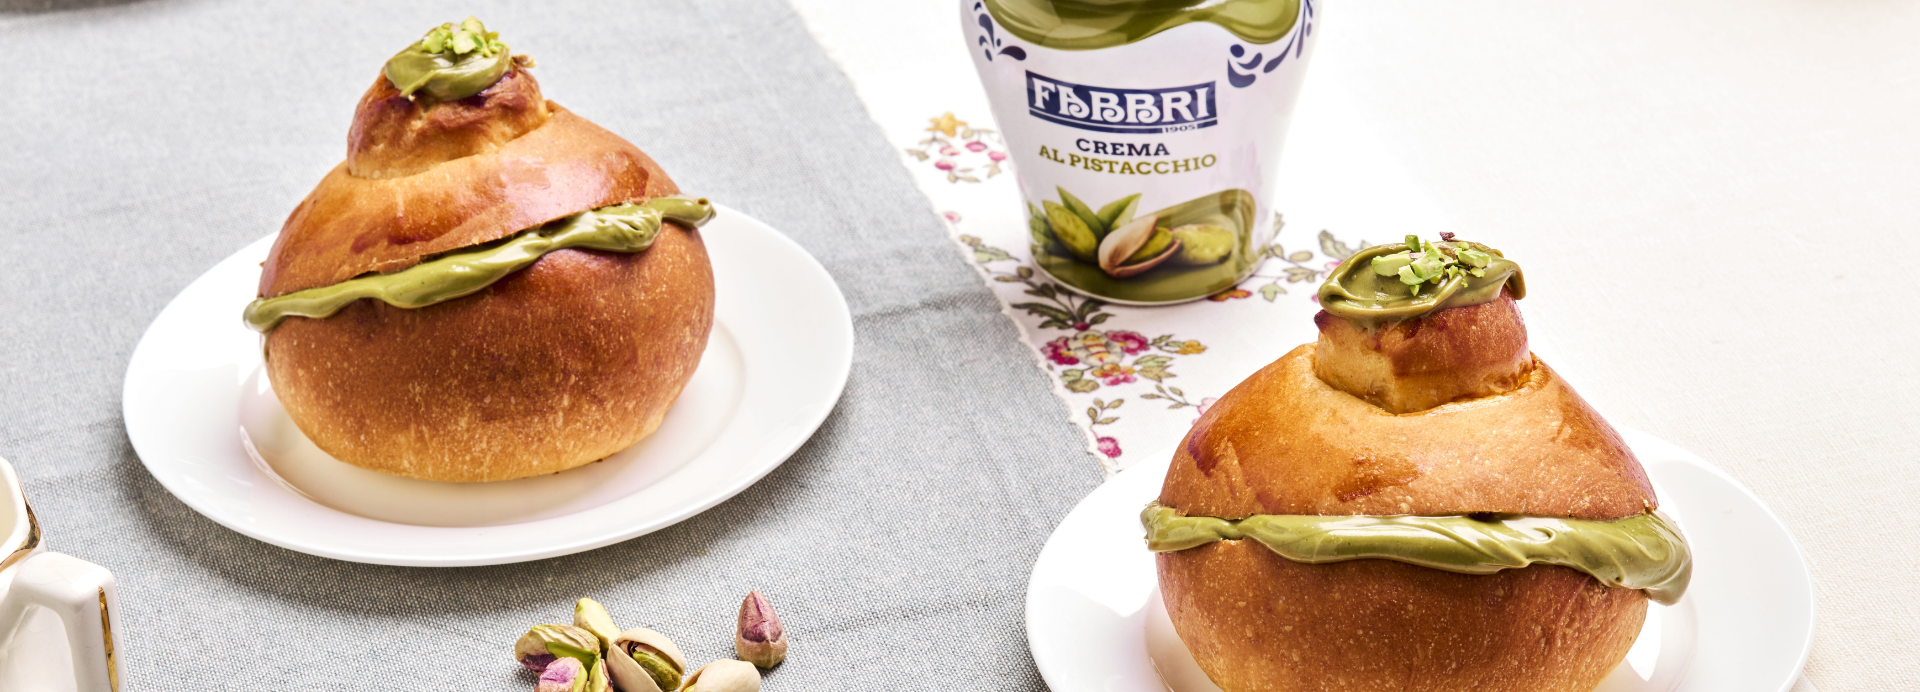 Fabbri spreads: discover the new temptations